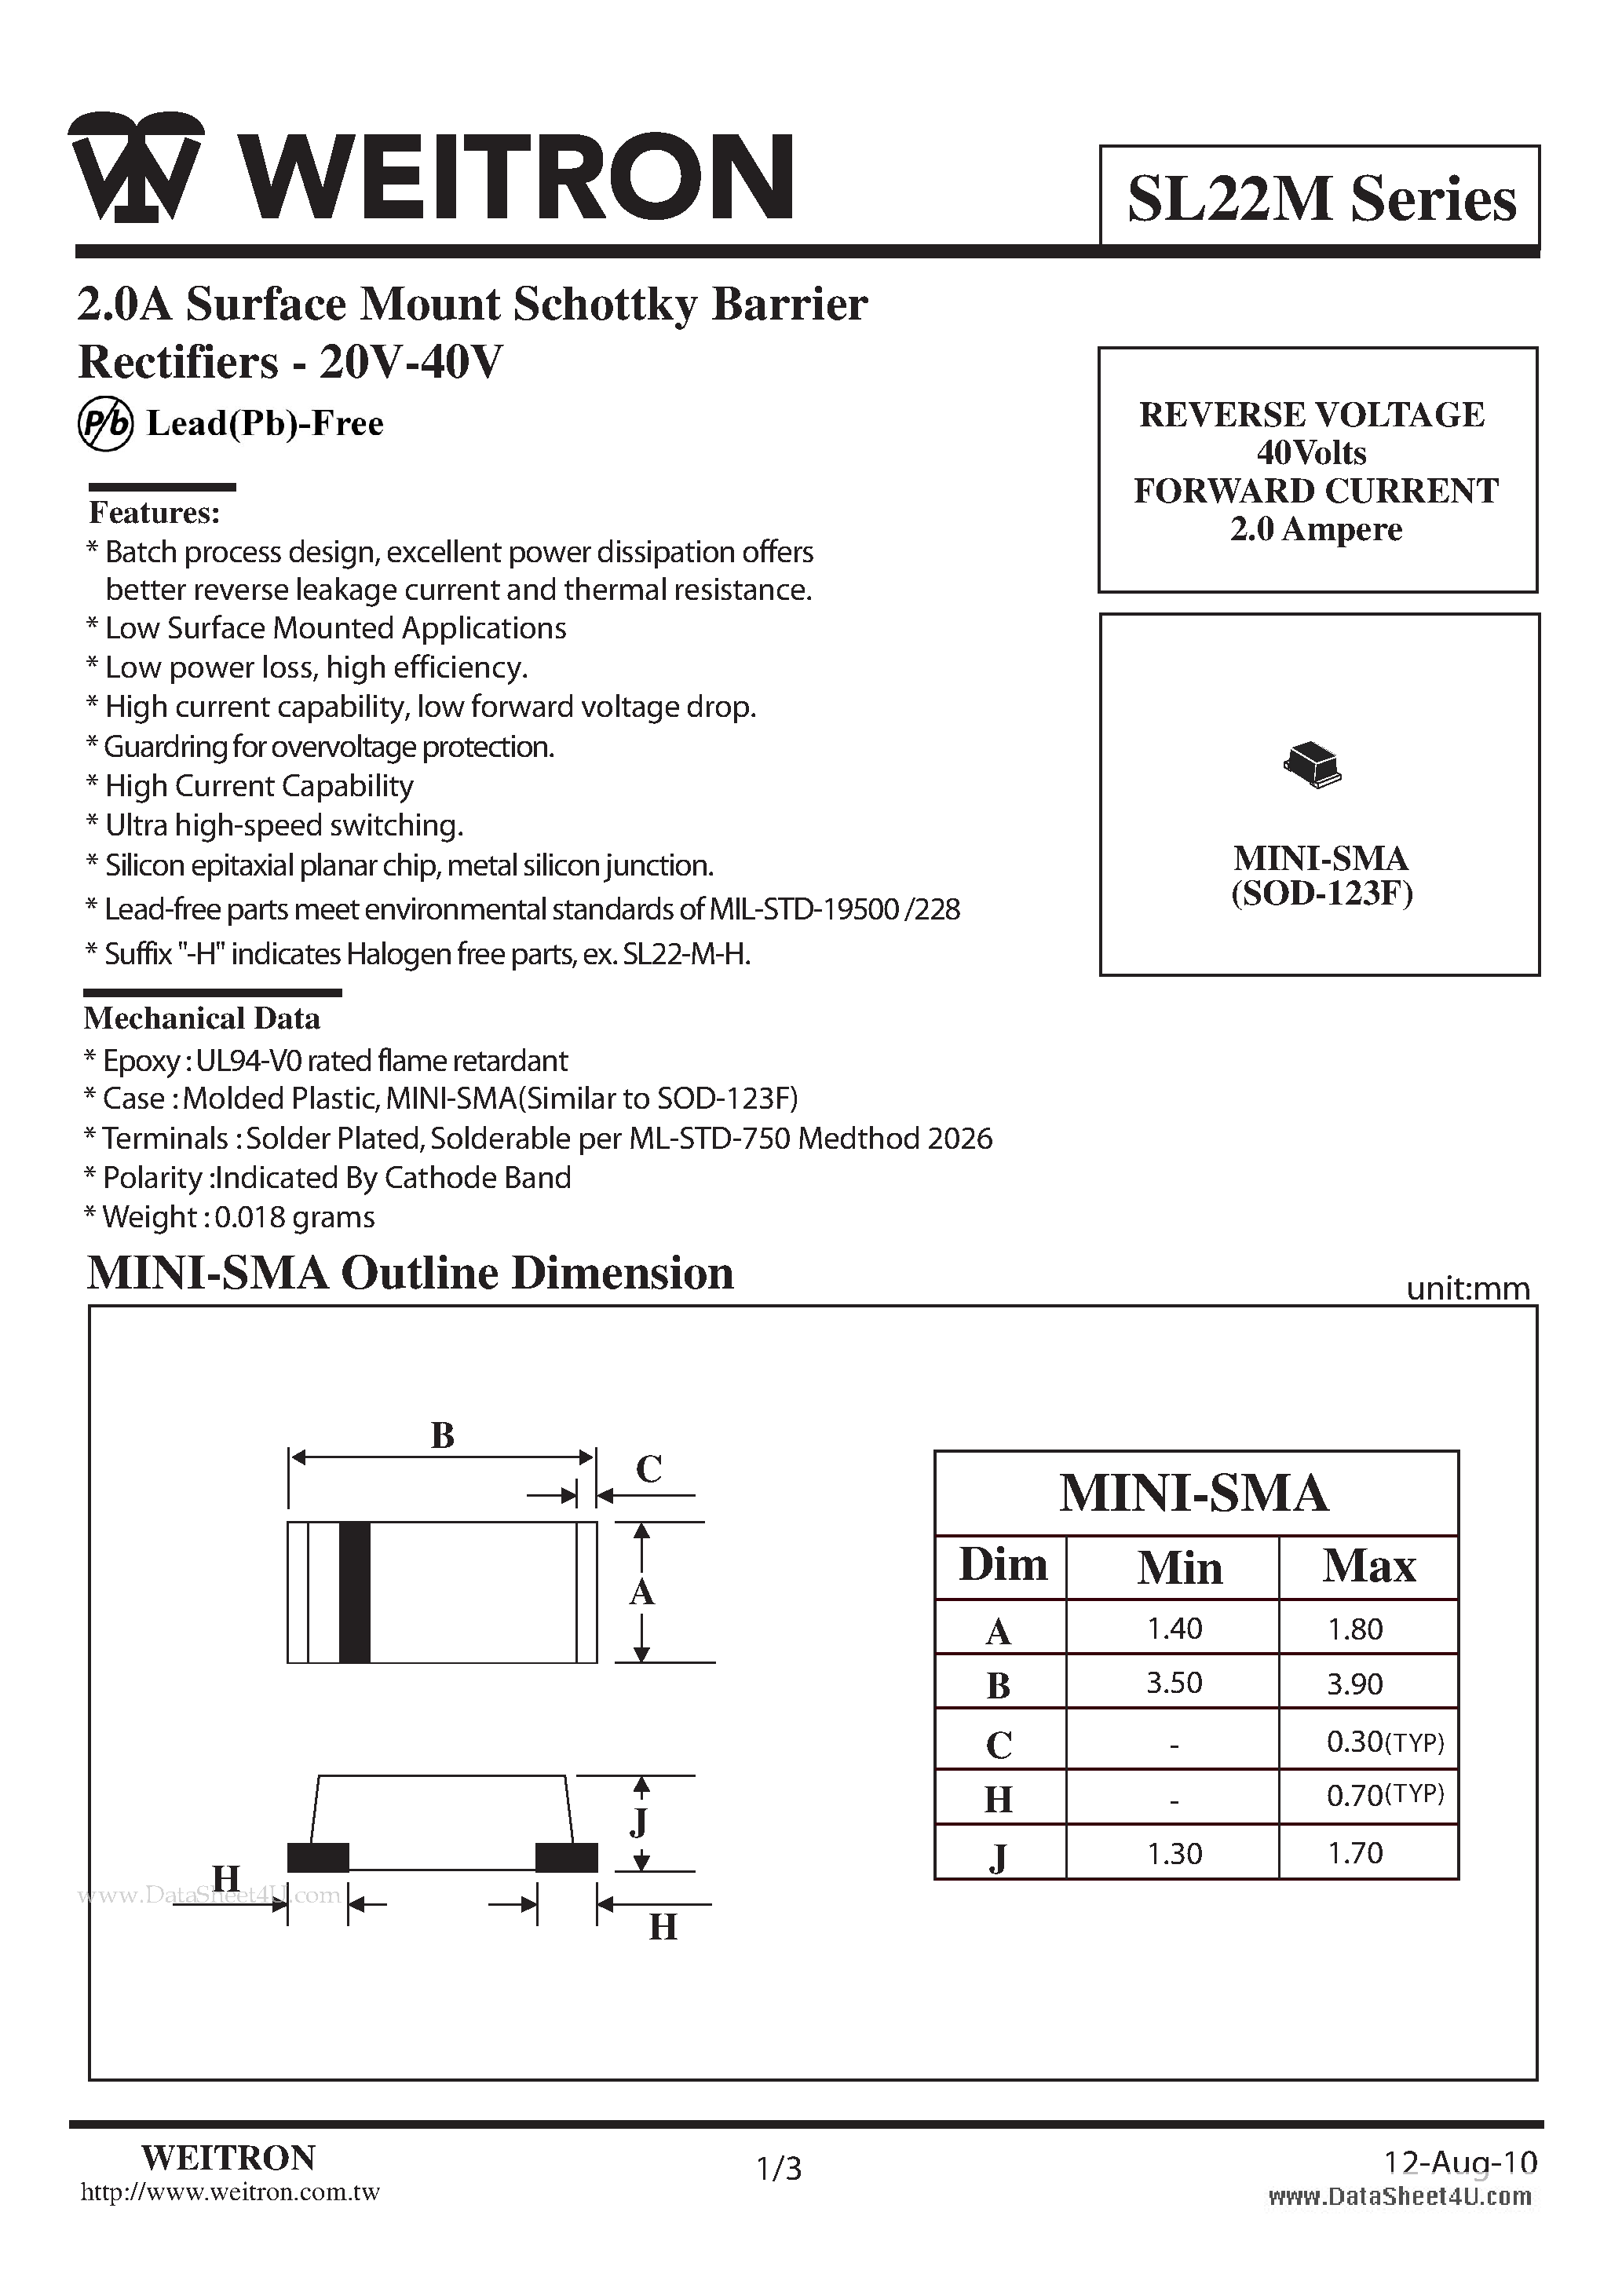 Datasheet SL22M - 2.0A Surface Mount Schottky Barrier Rectifiers - 20V-40V page 1